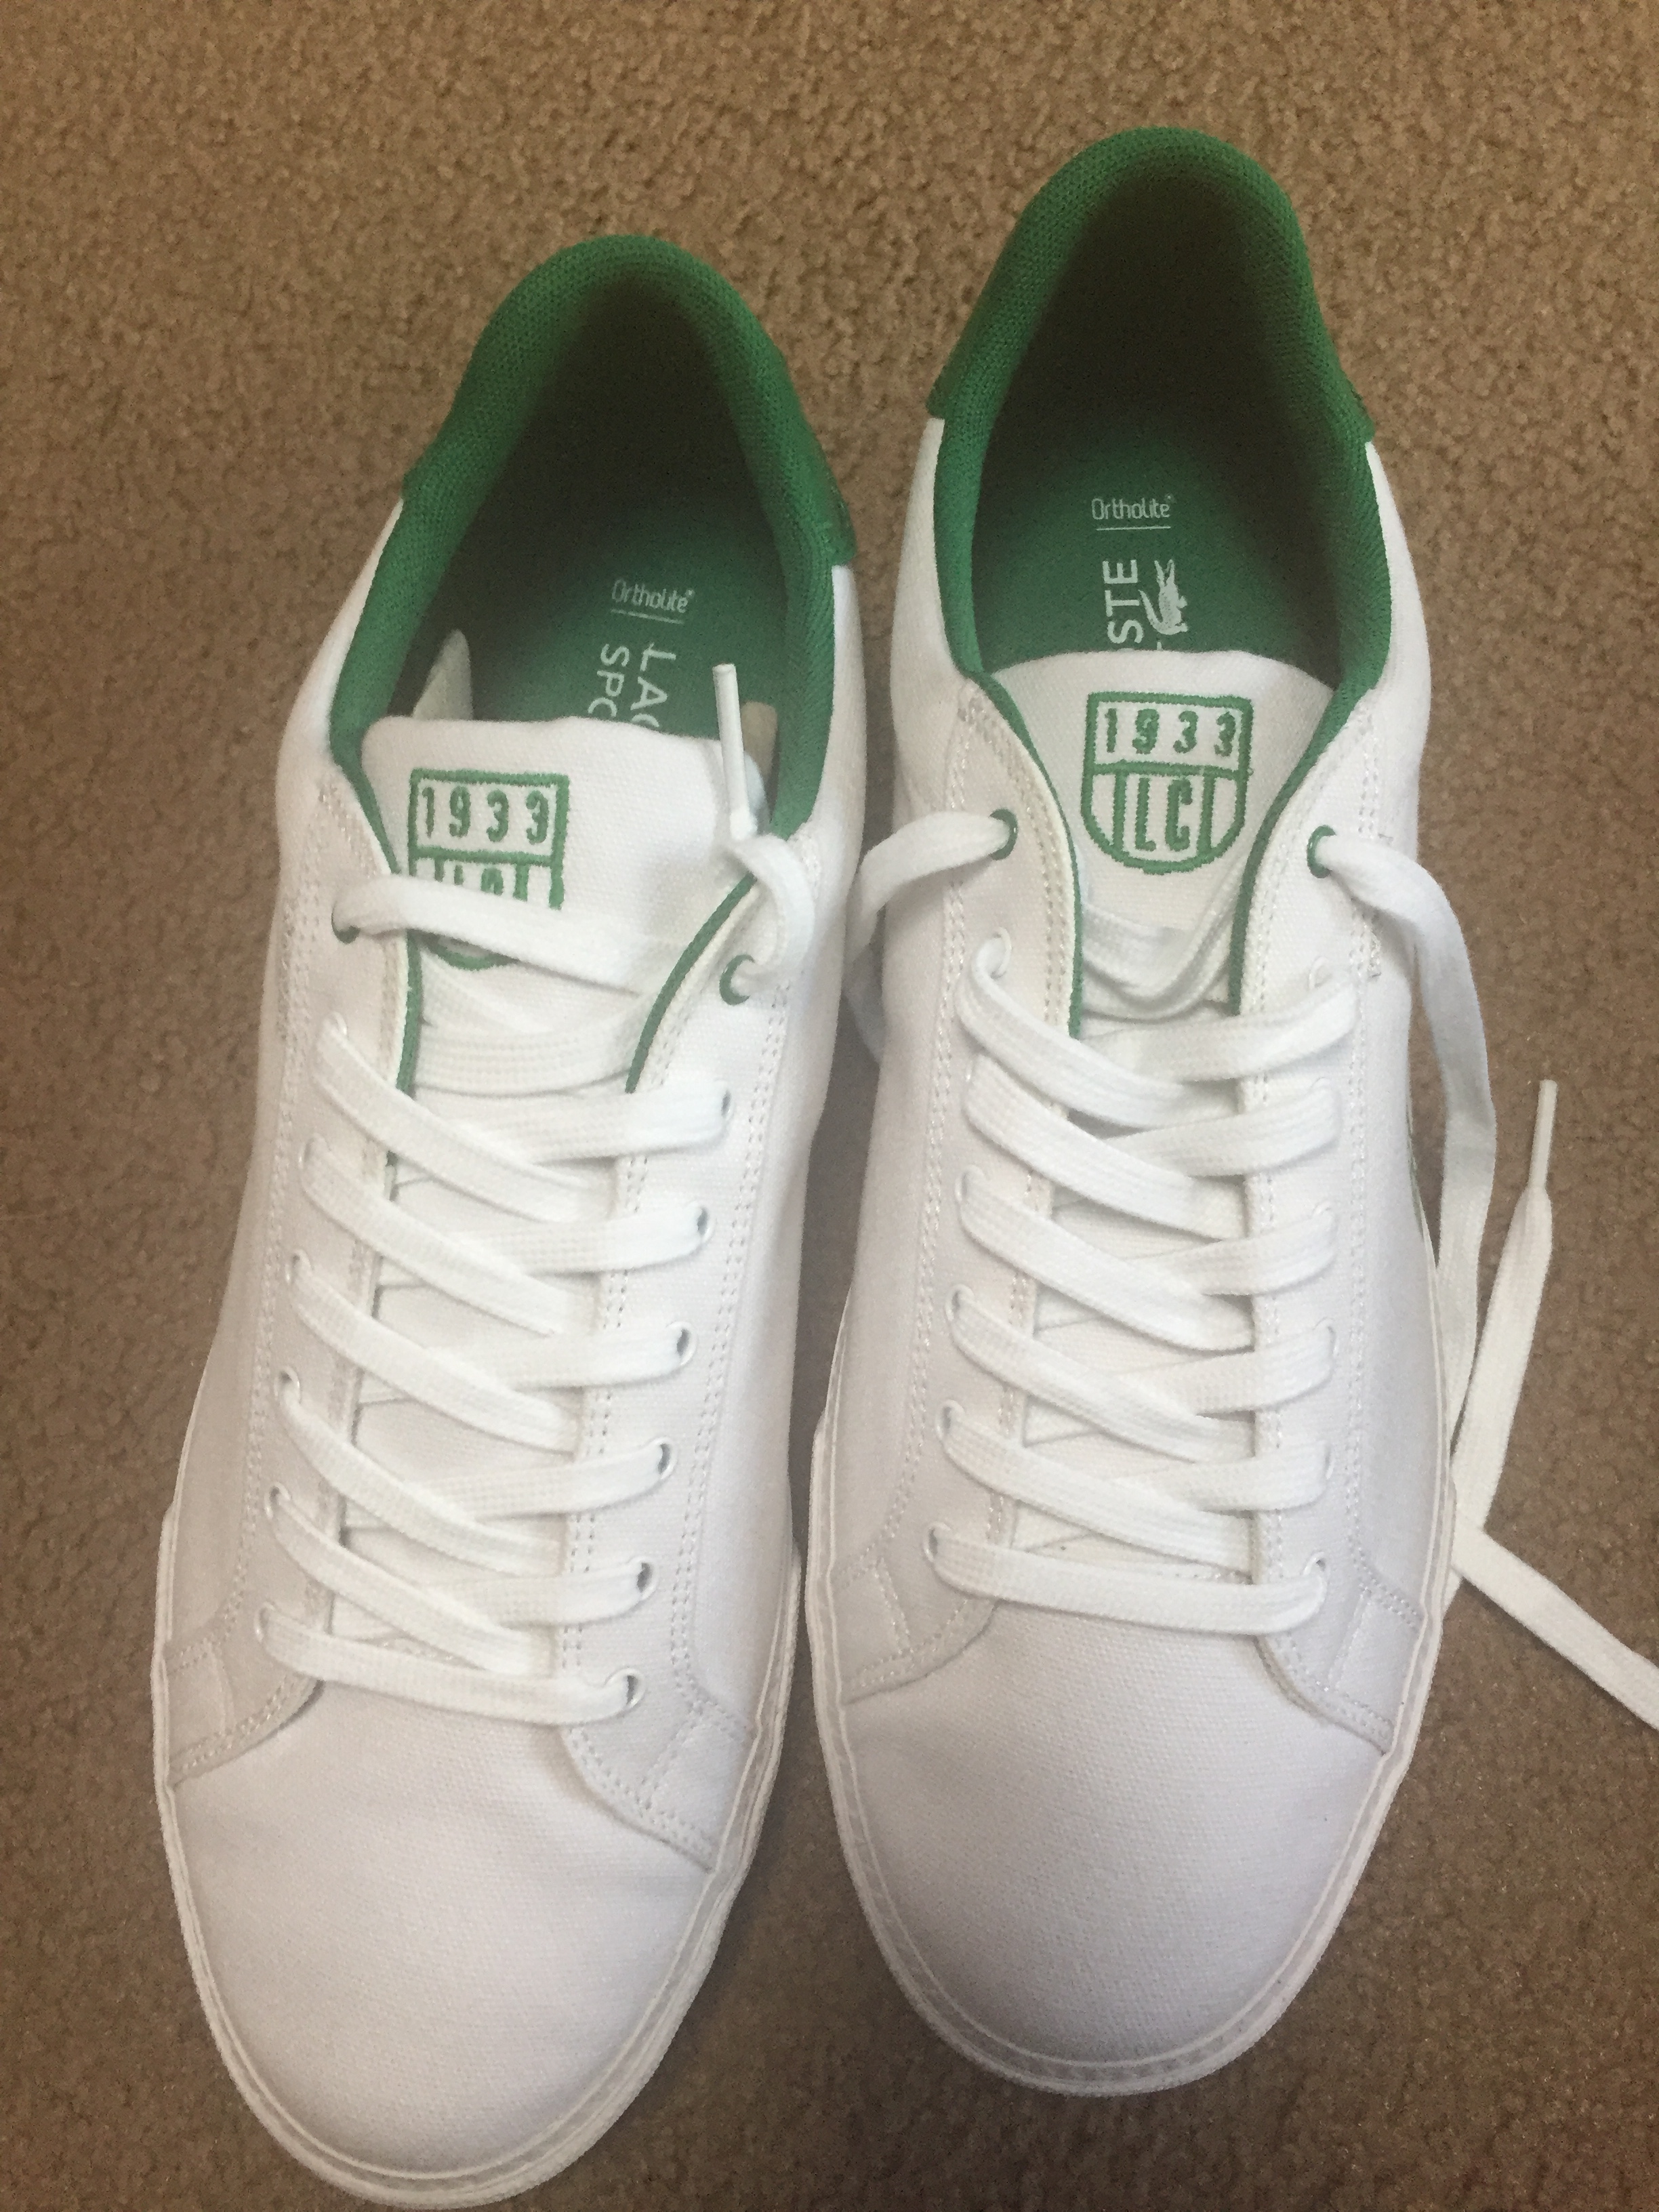 lacoste fake vs real shoes